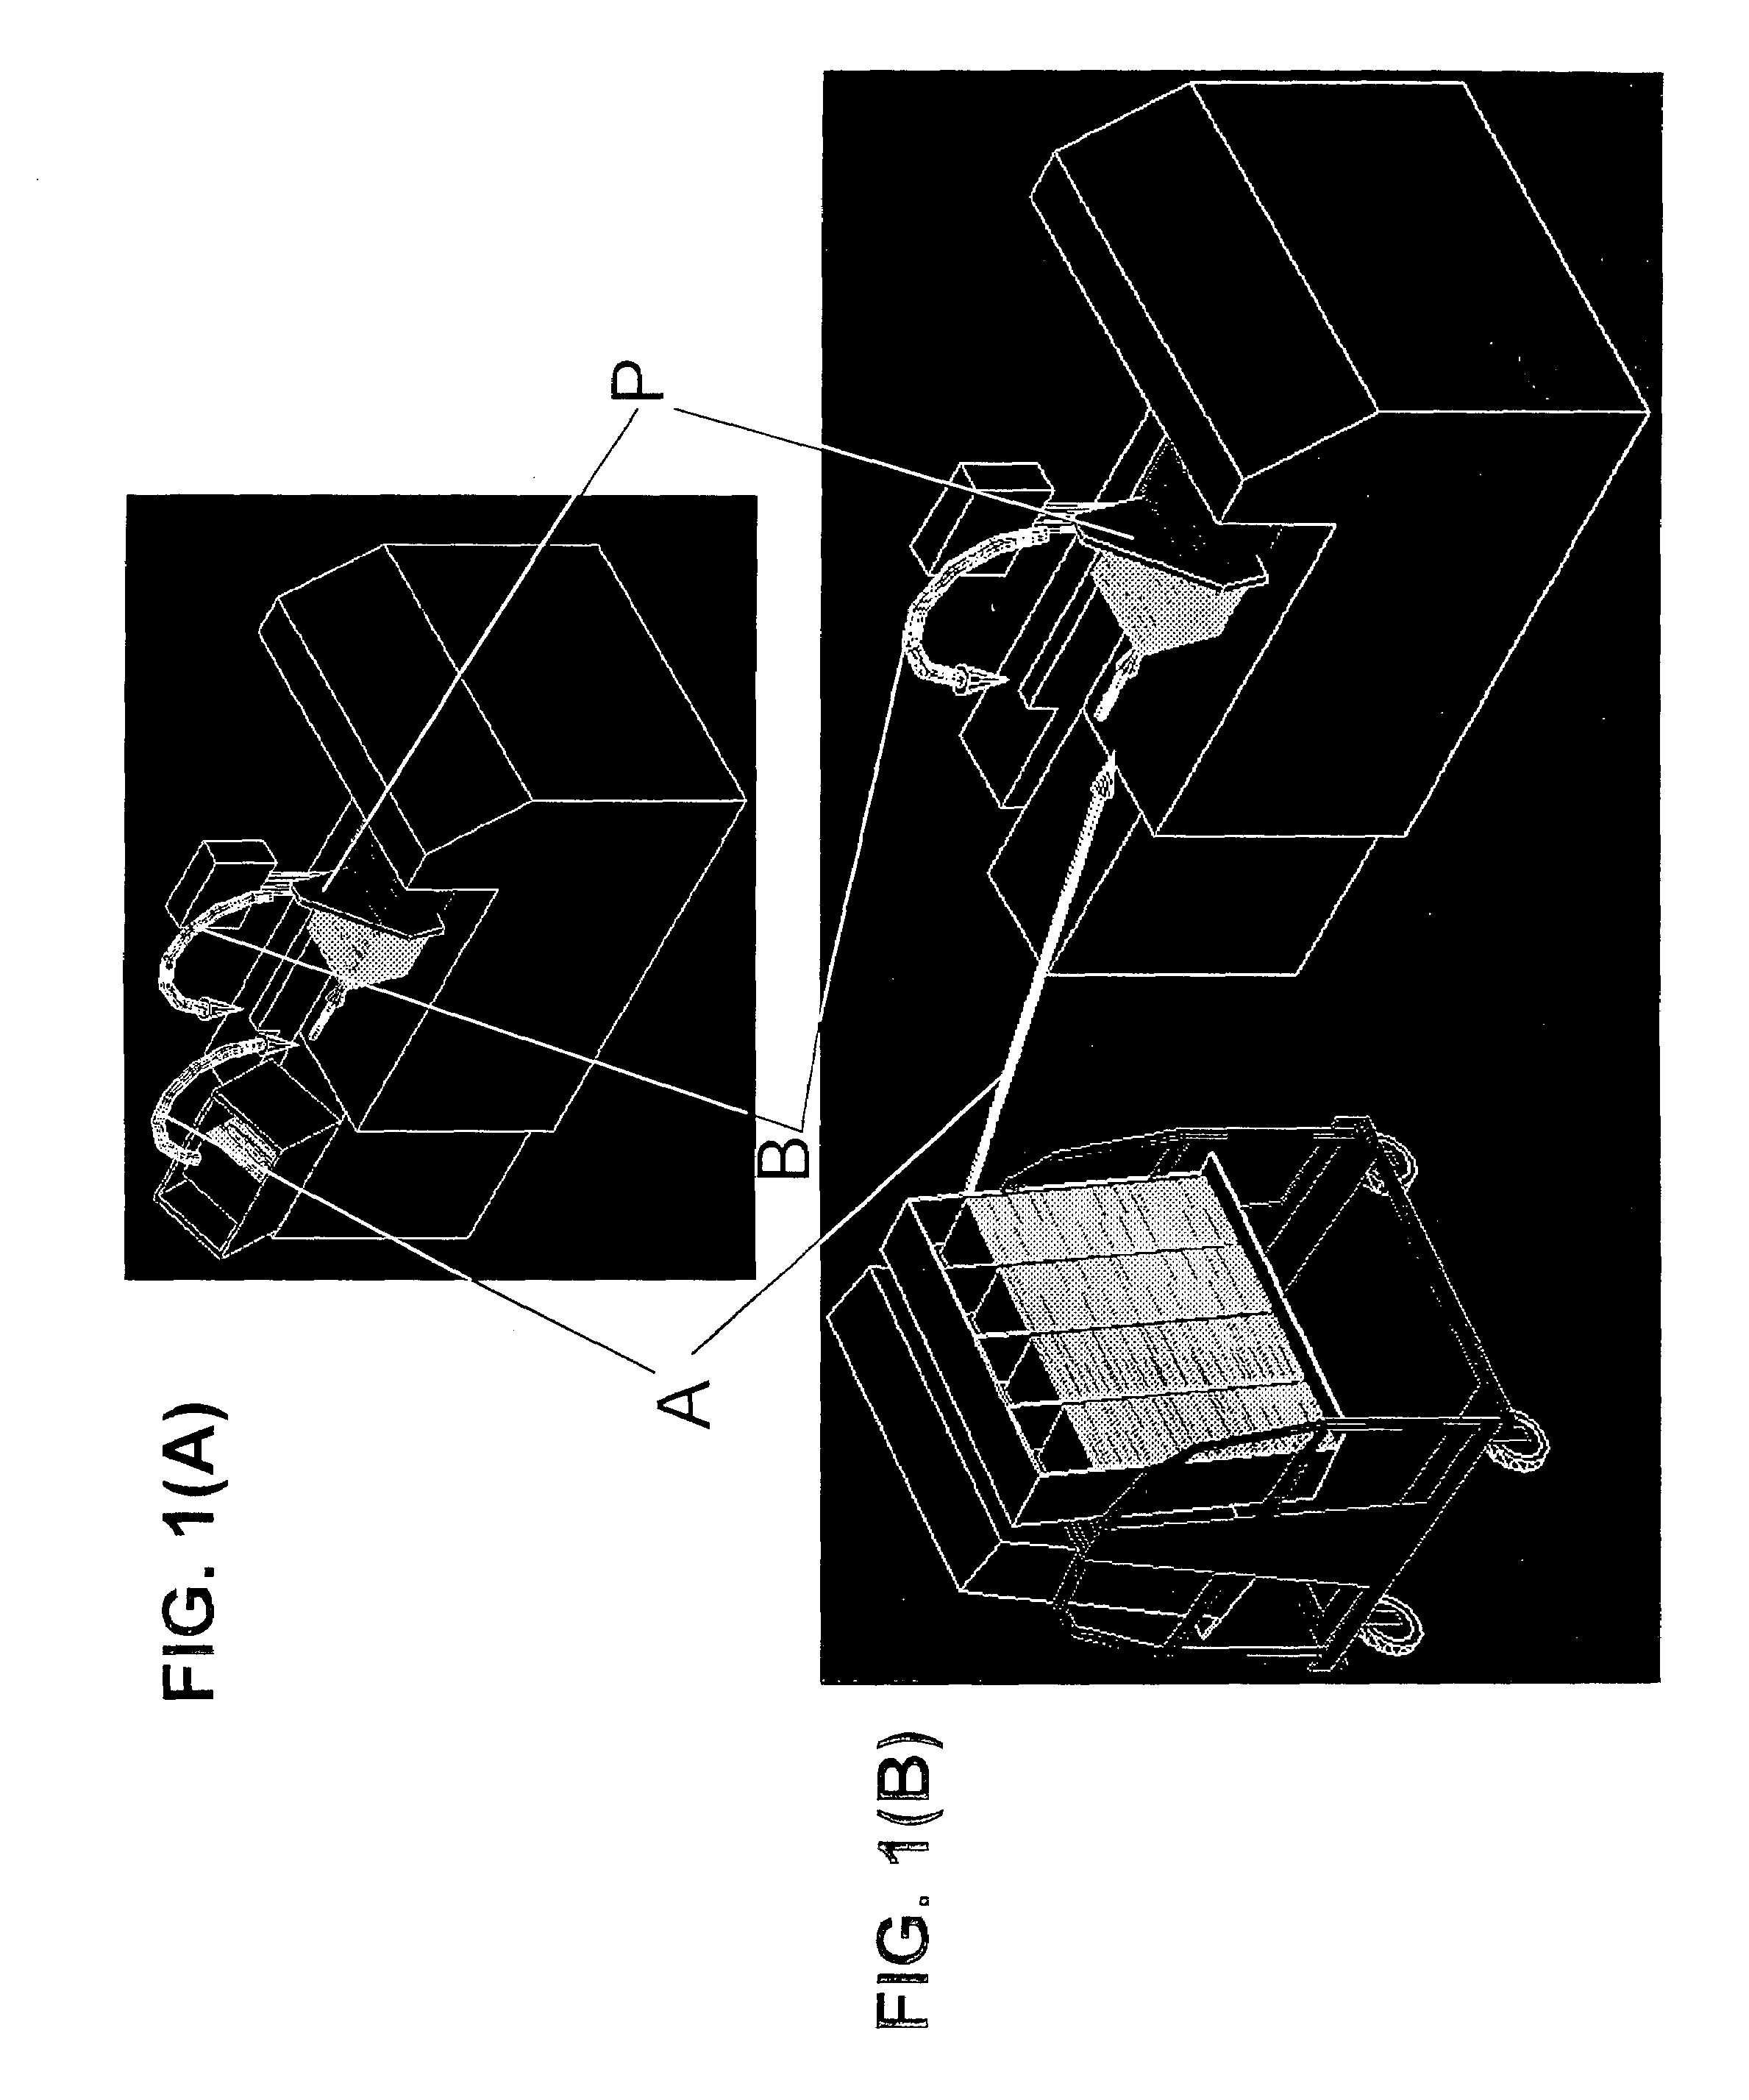 Automated induction systems and methods for mail and/or other objects